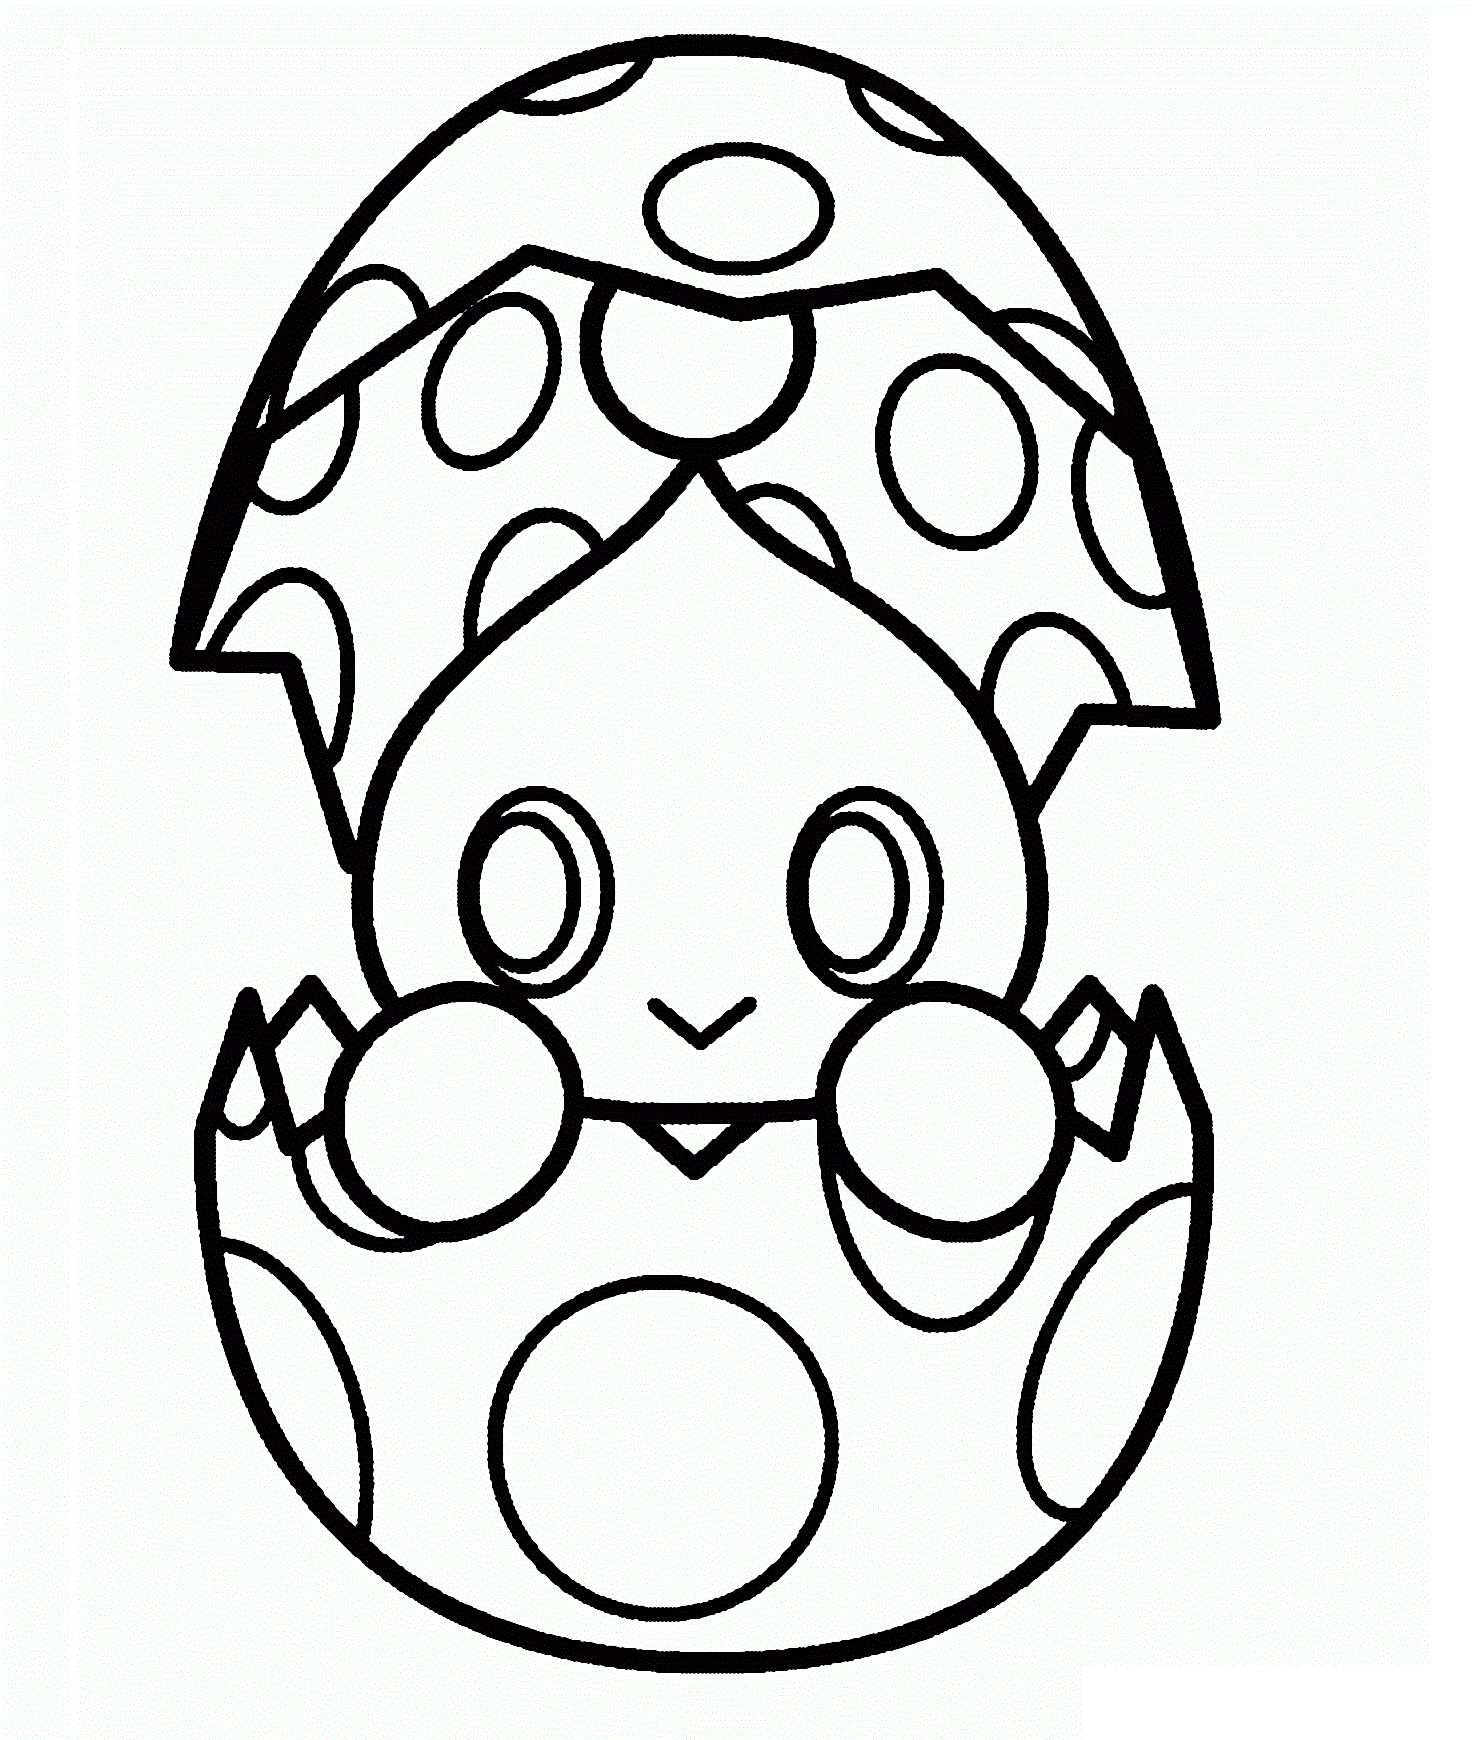 Chao In The Eggshell Coloring Page